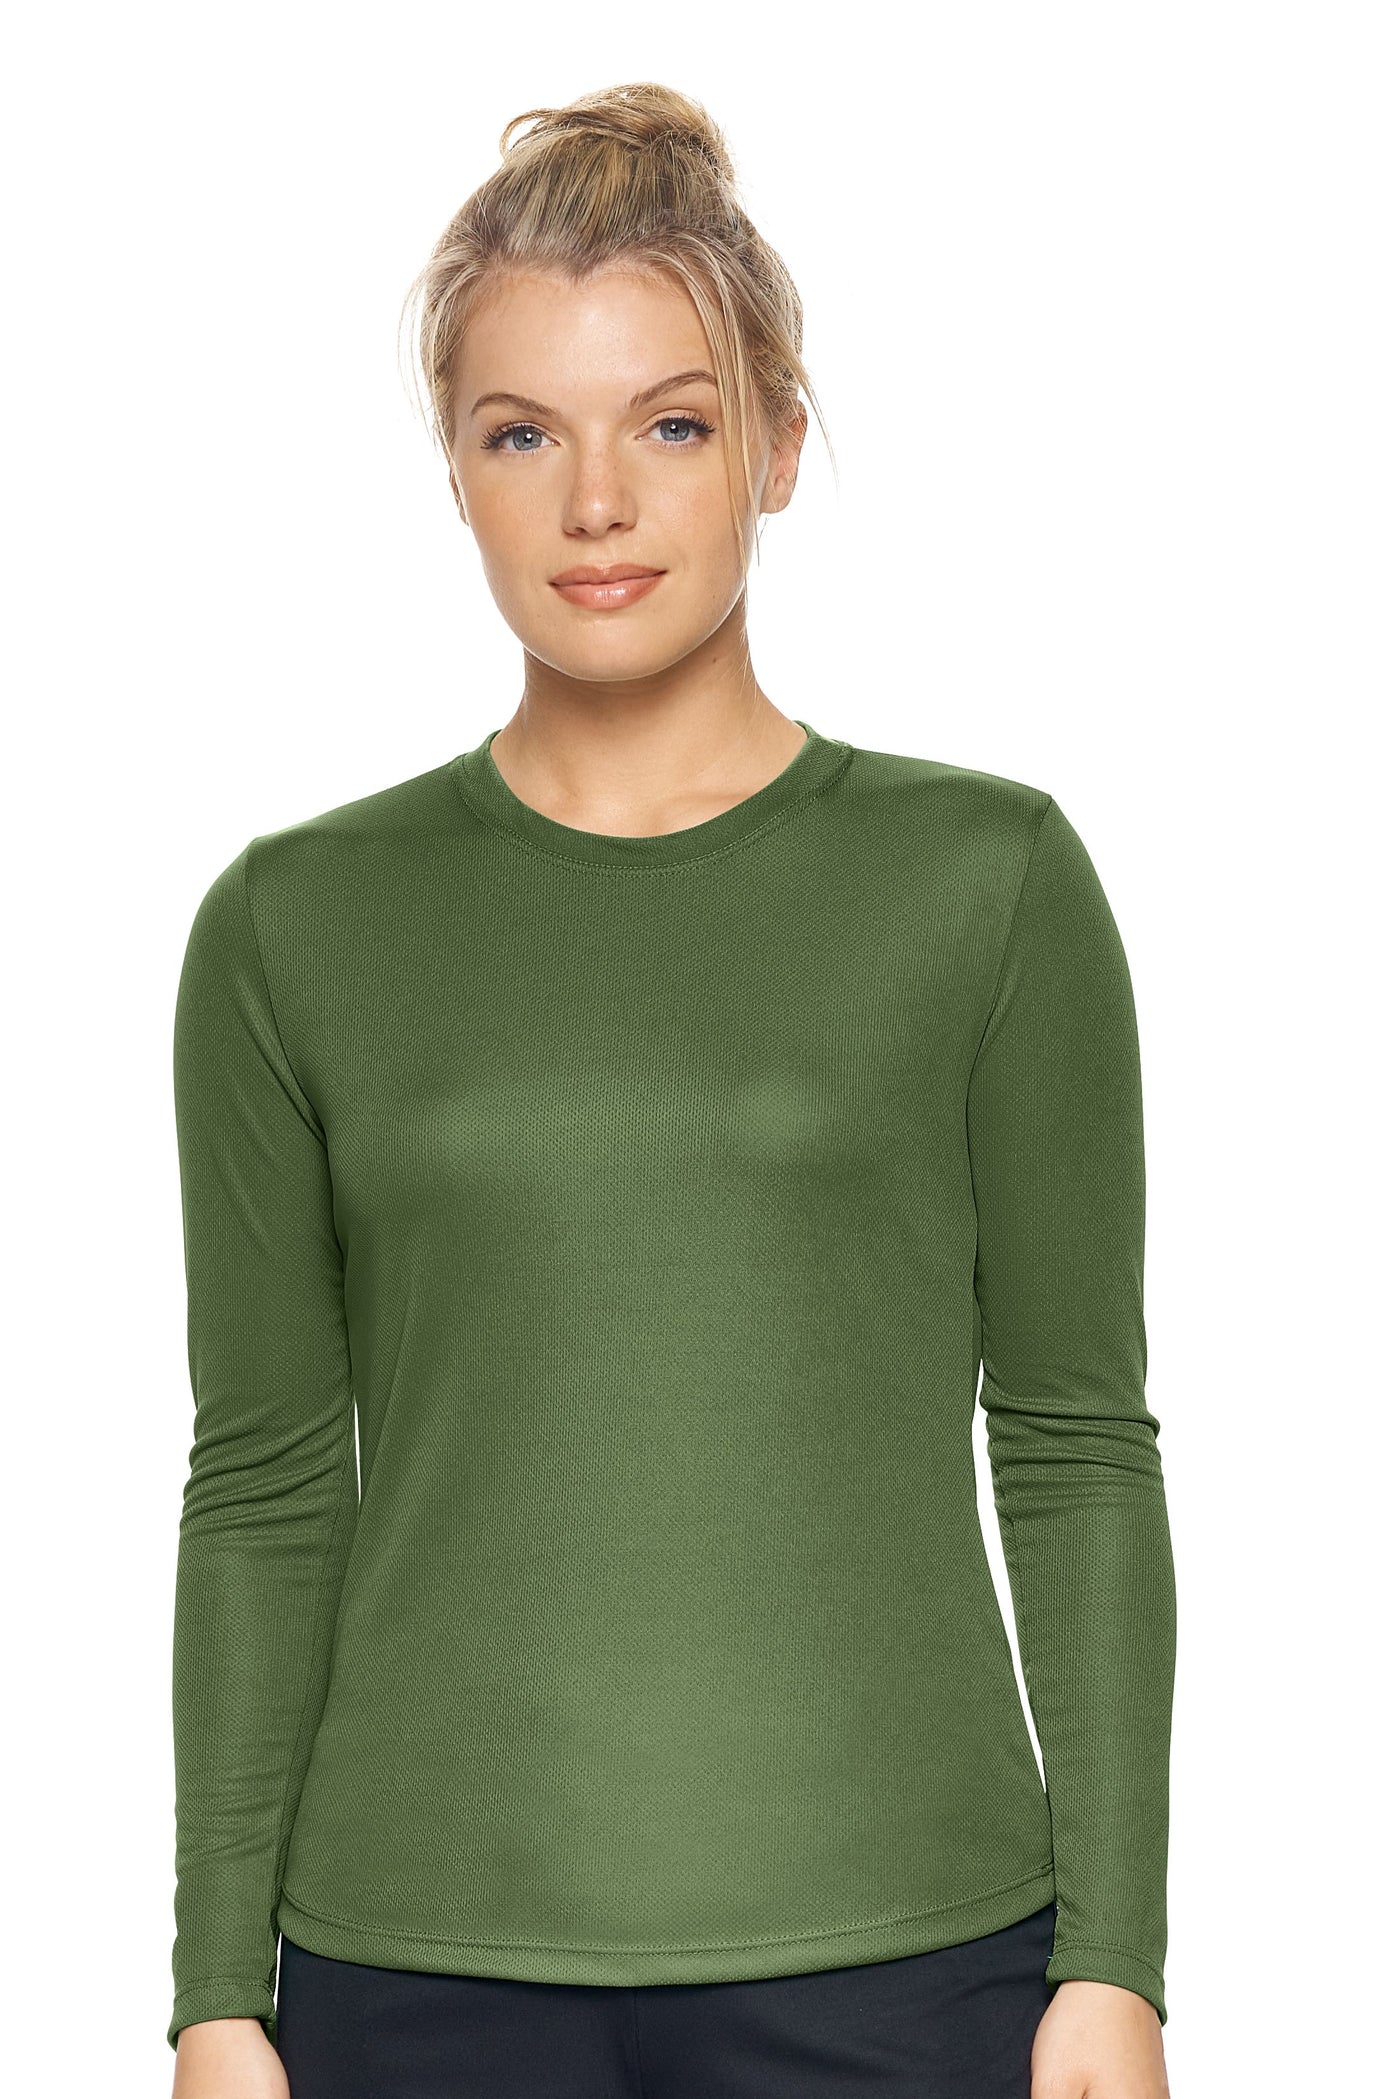 Oxymesh™ Long Sleeve Tec Tee 🇺🇸 - Expert Brand Apparel#color_military-green